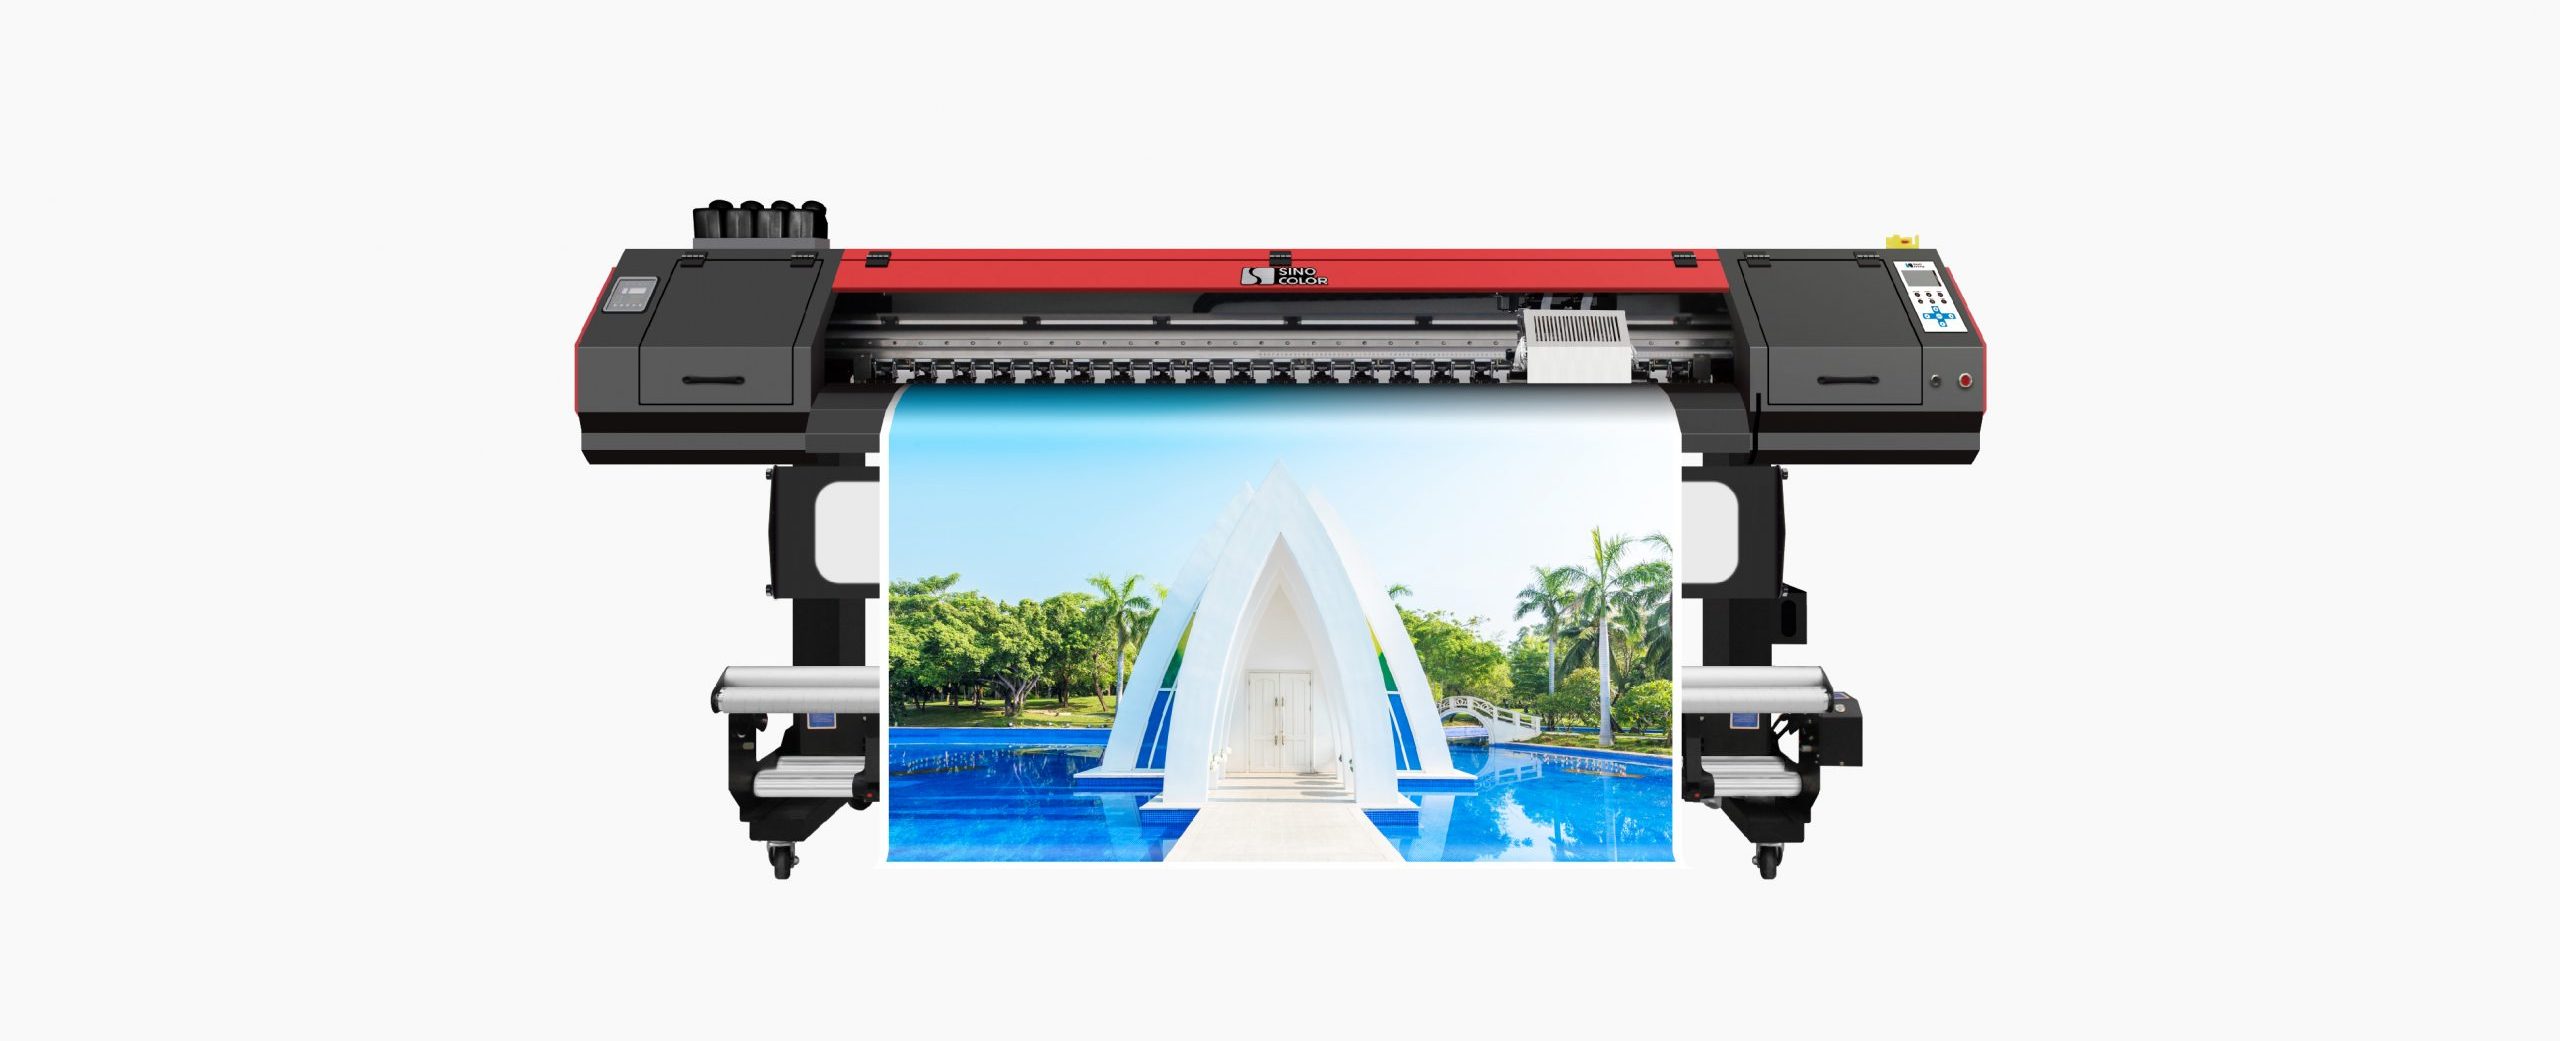 /products/uv-printer/uv-roll-to-roll-printer/1383.html images